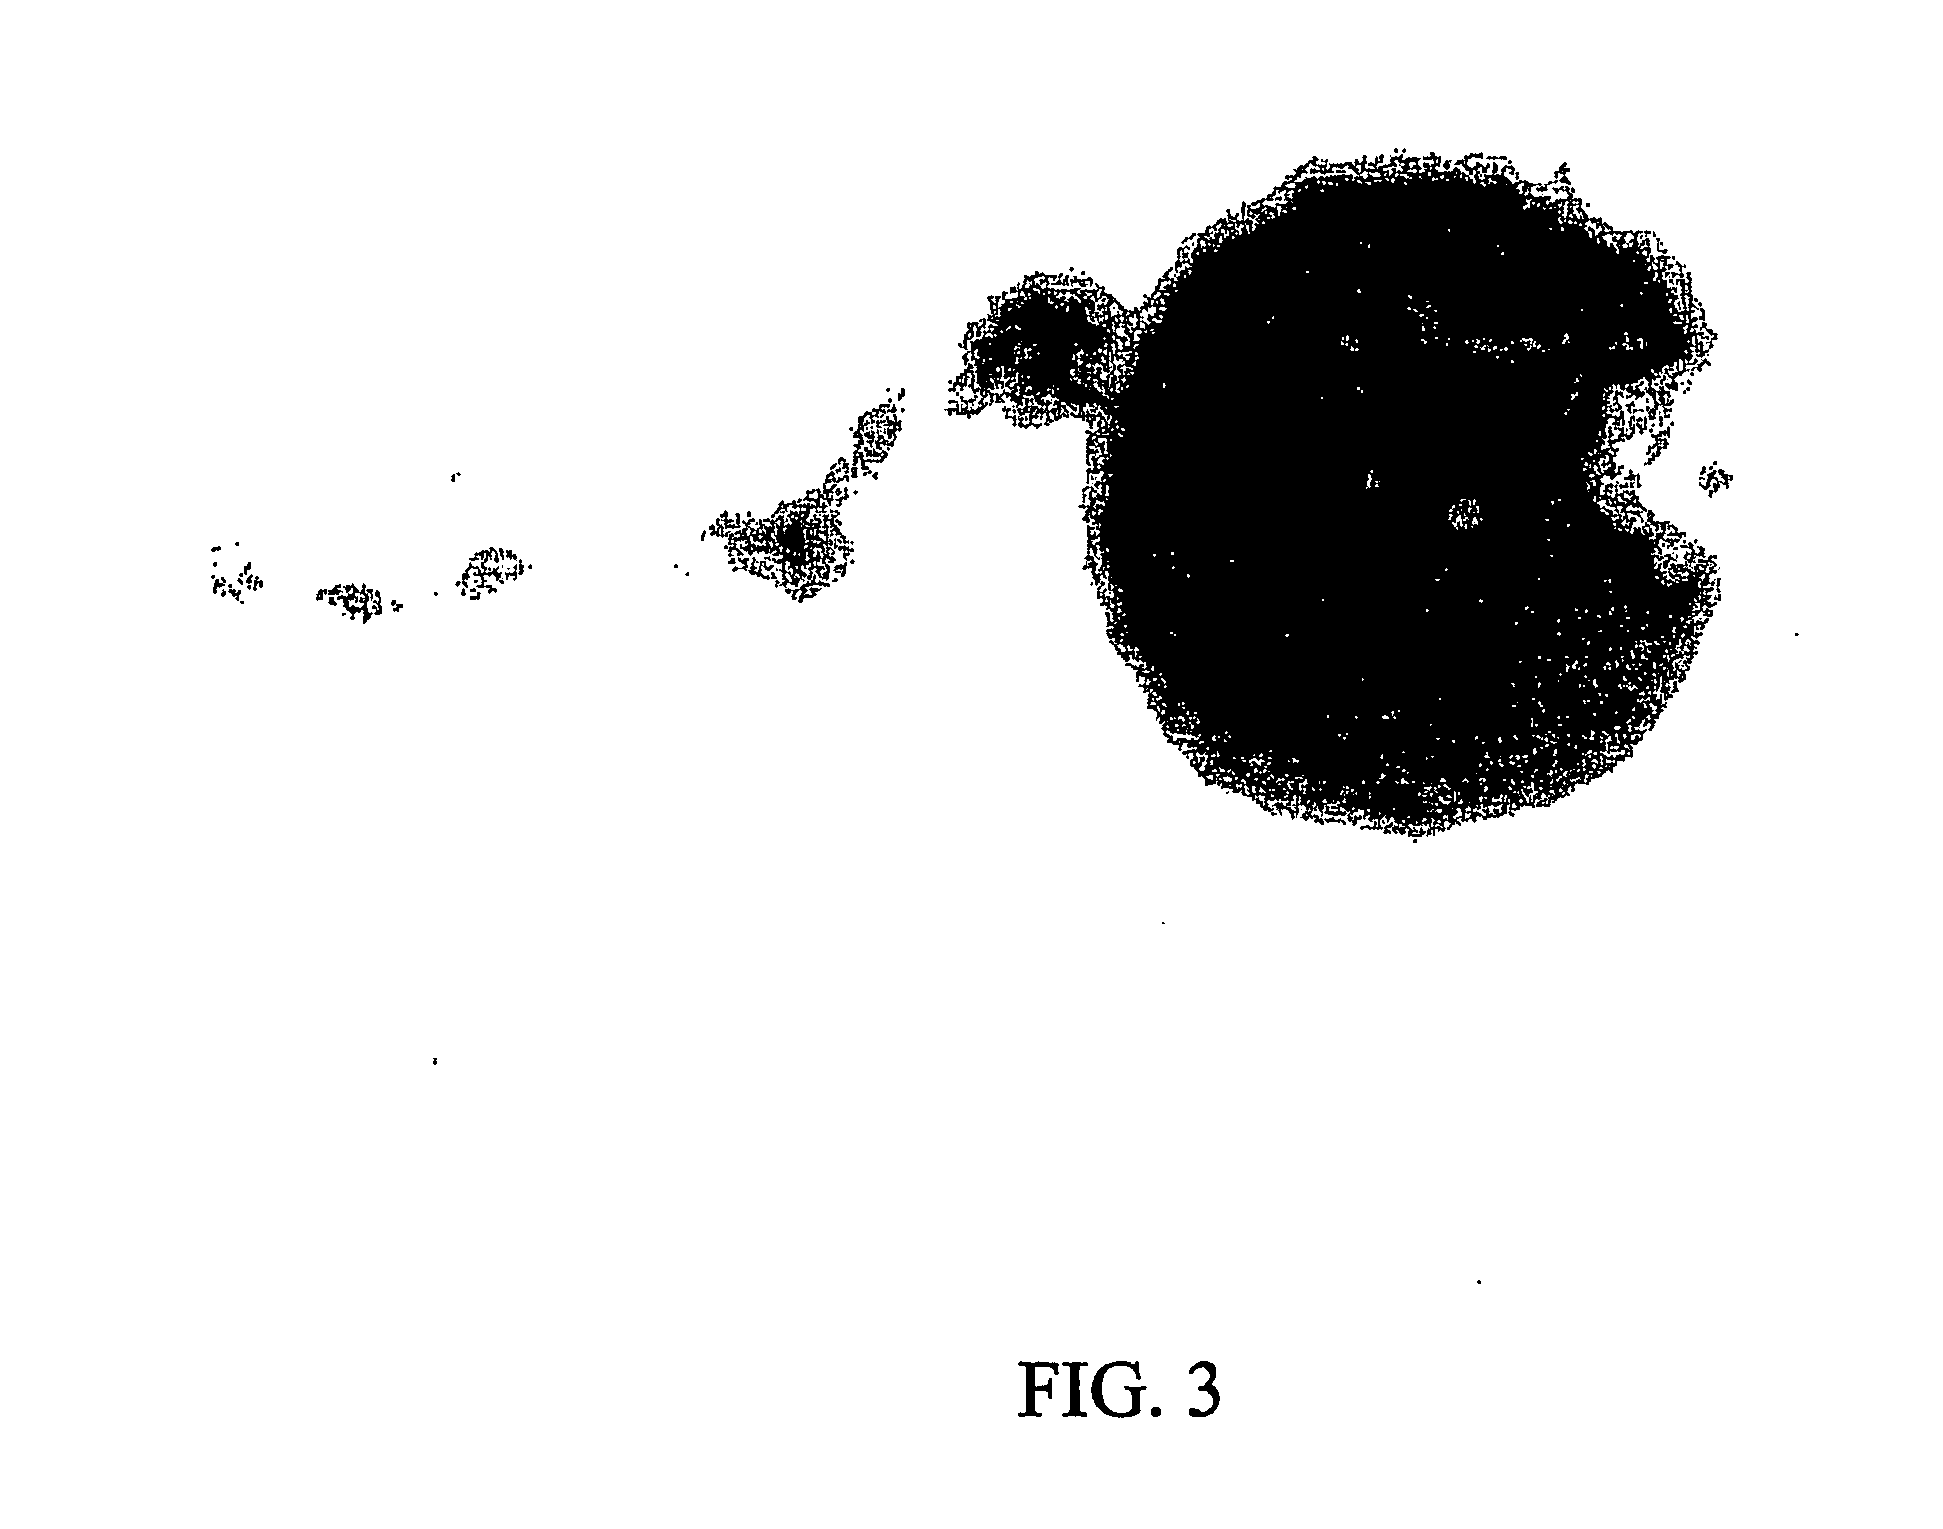 Tropicalizing agent, and methods for making and using the same